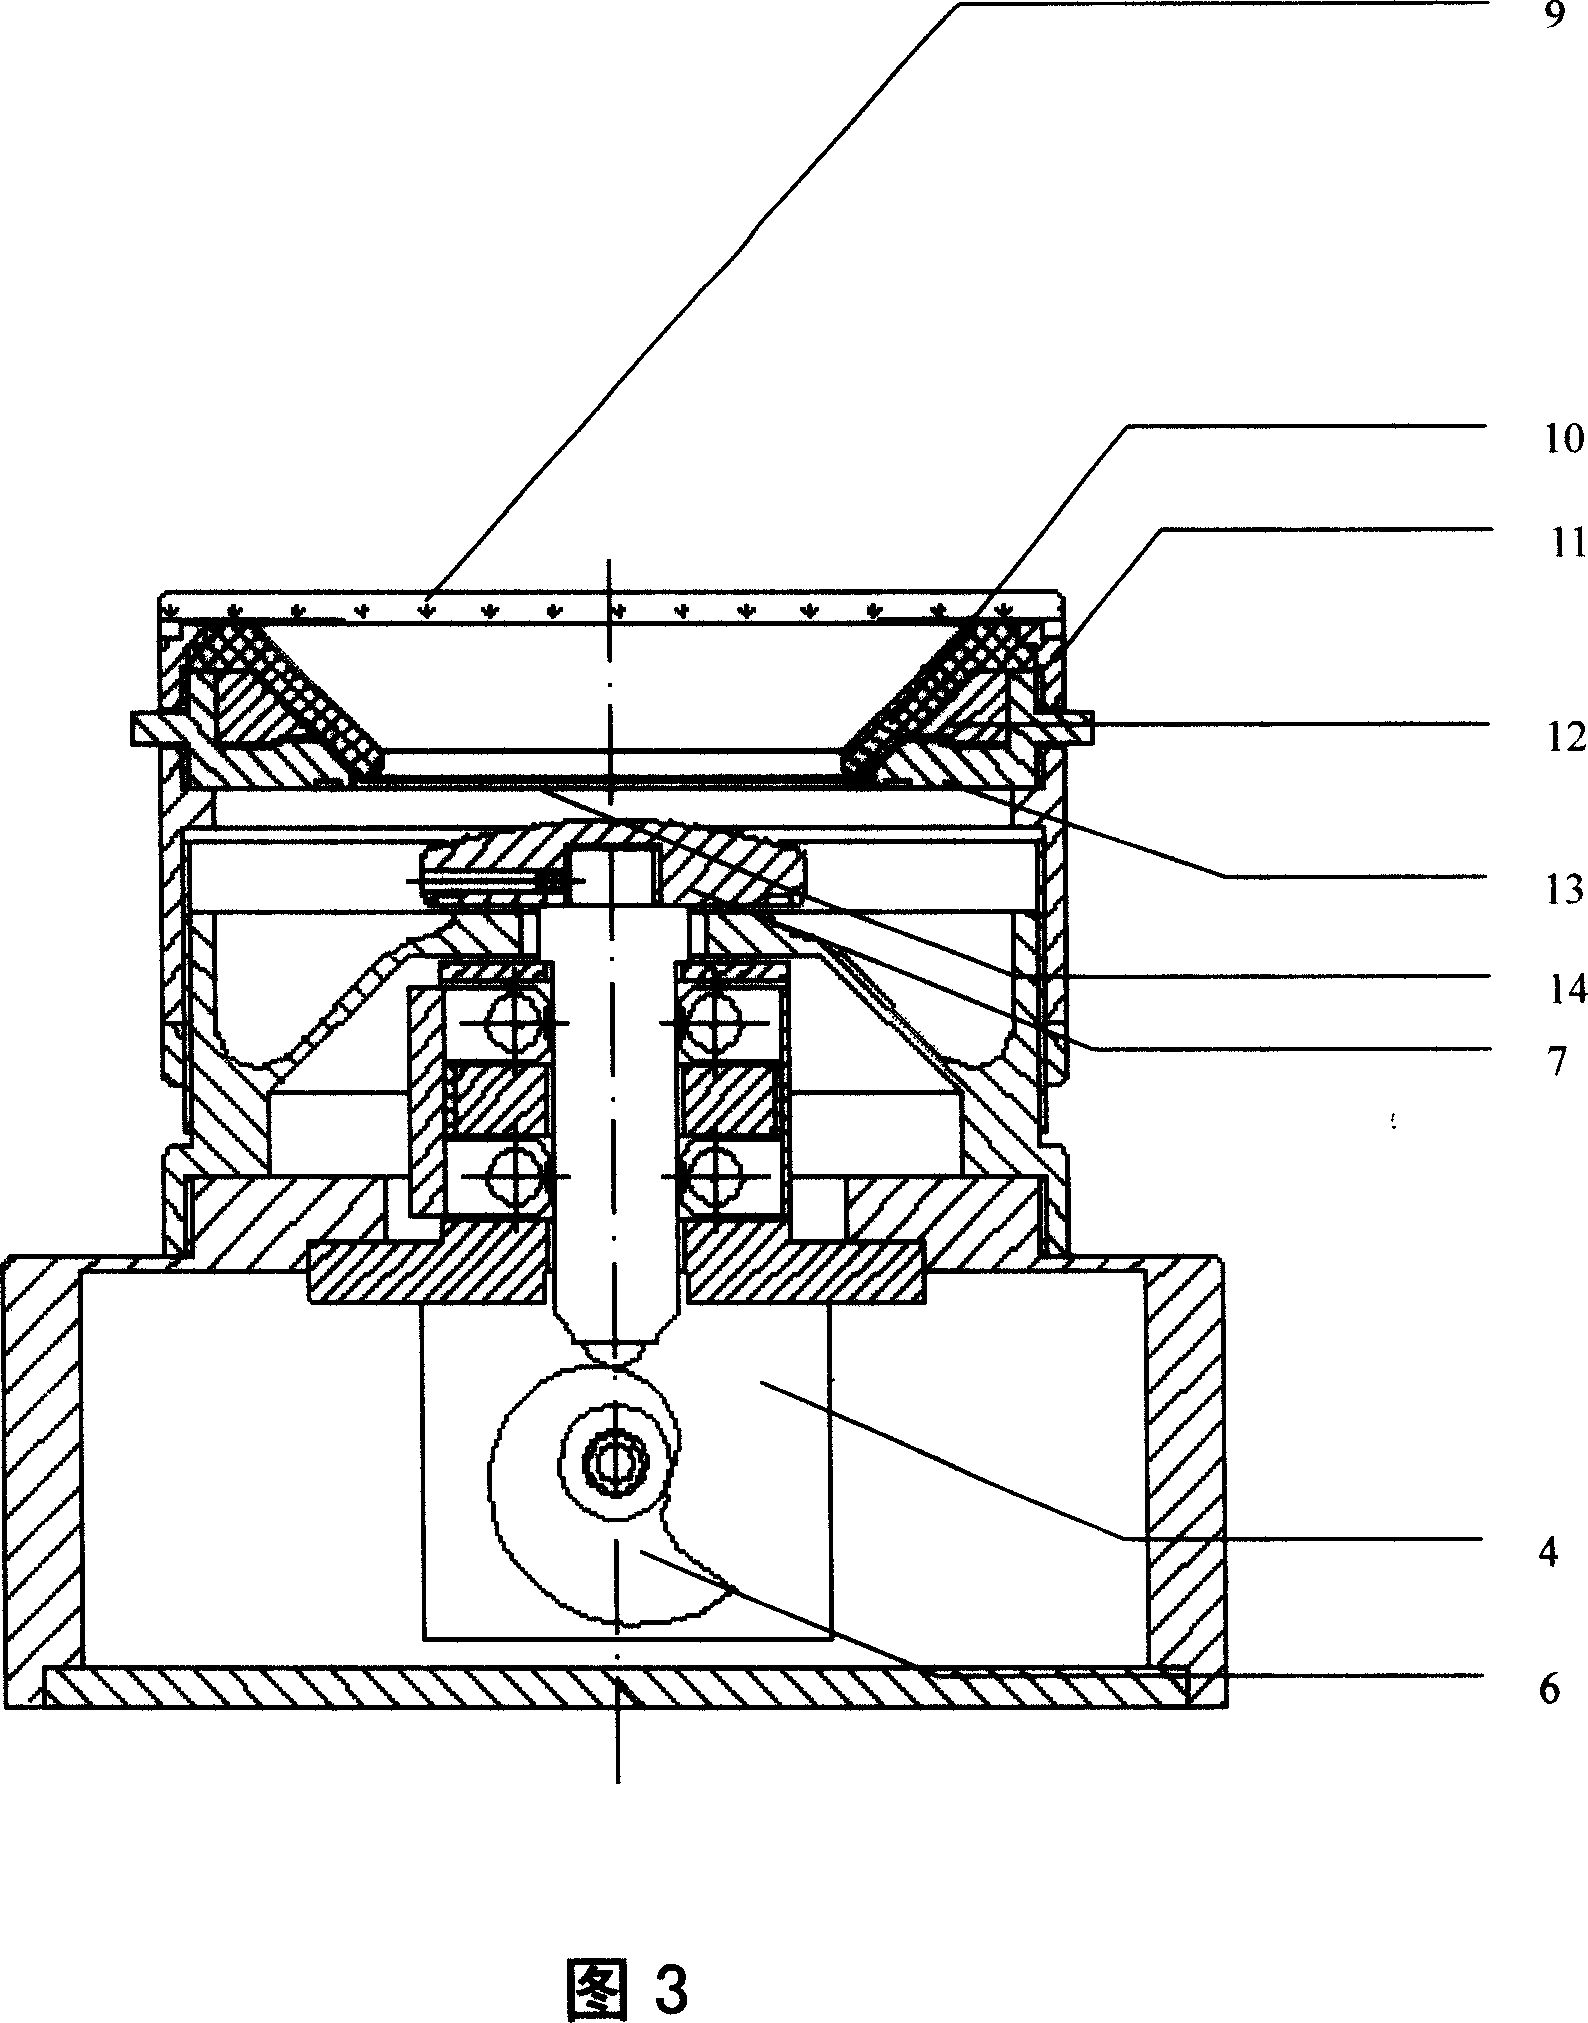 Experimental apparatus for loading cell through digital controlled mechanical strain